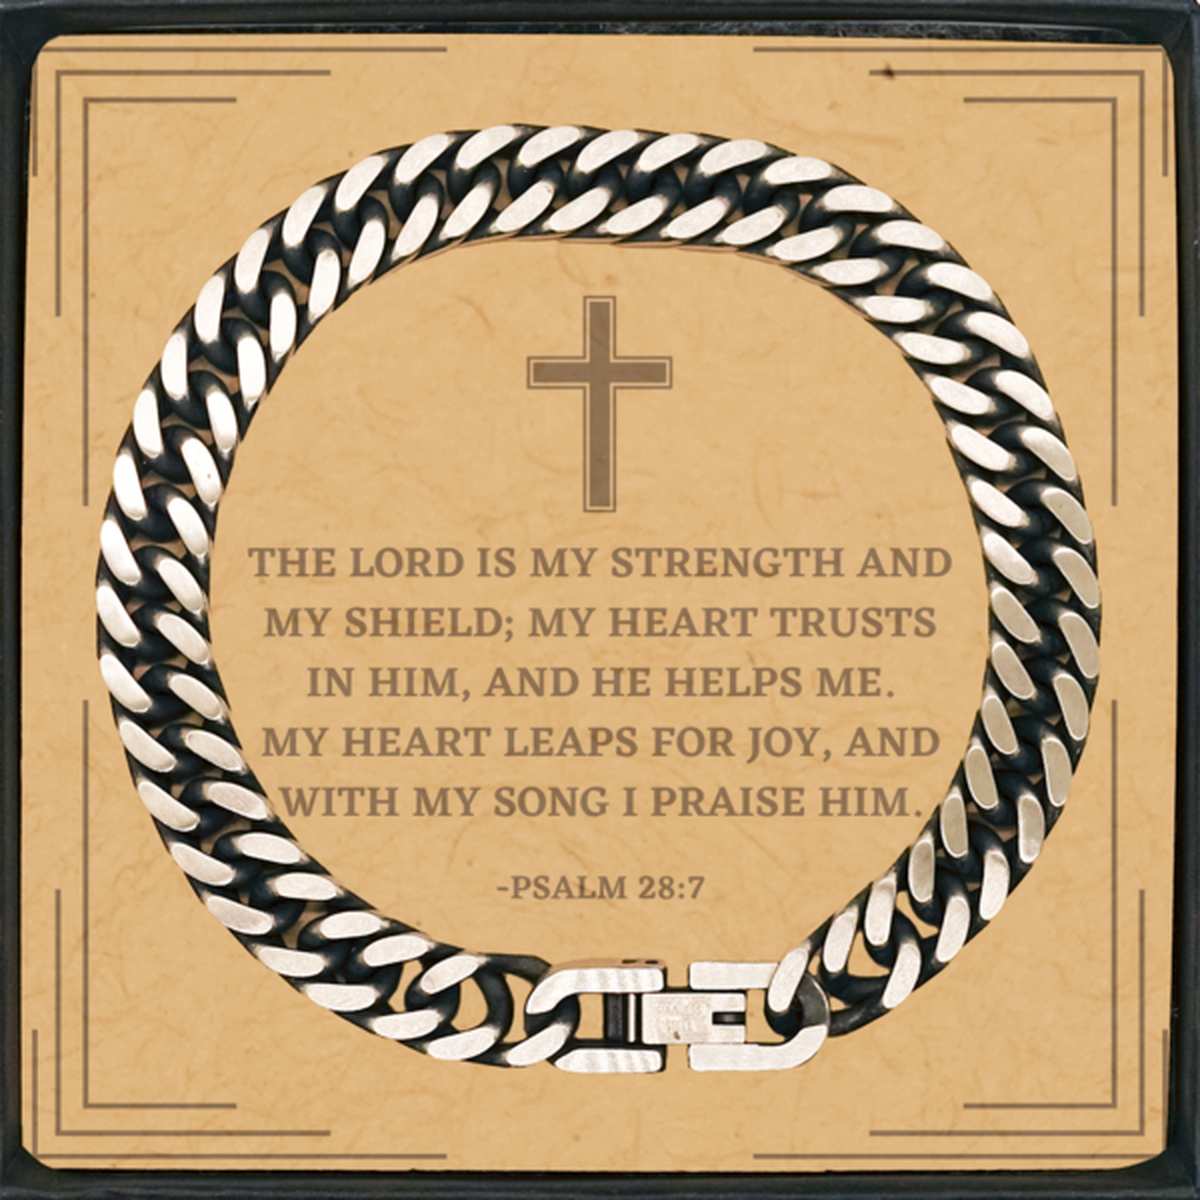 Baptism Gifts For Teenage Boys Girls, Christian Bible Verse Cuban Link Chain Bracelet, The Lord is my strength and my shield, Confirmation Gifts, Bible Verse Card for Son, Godson, Grandson